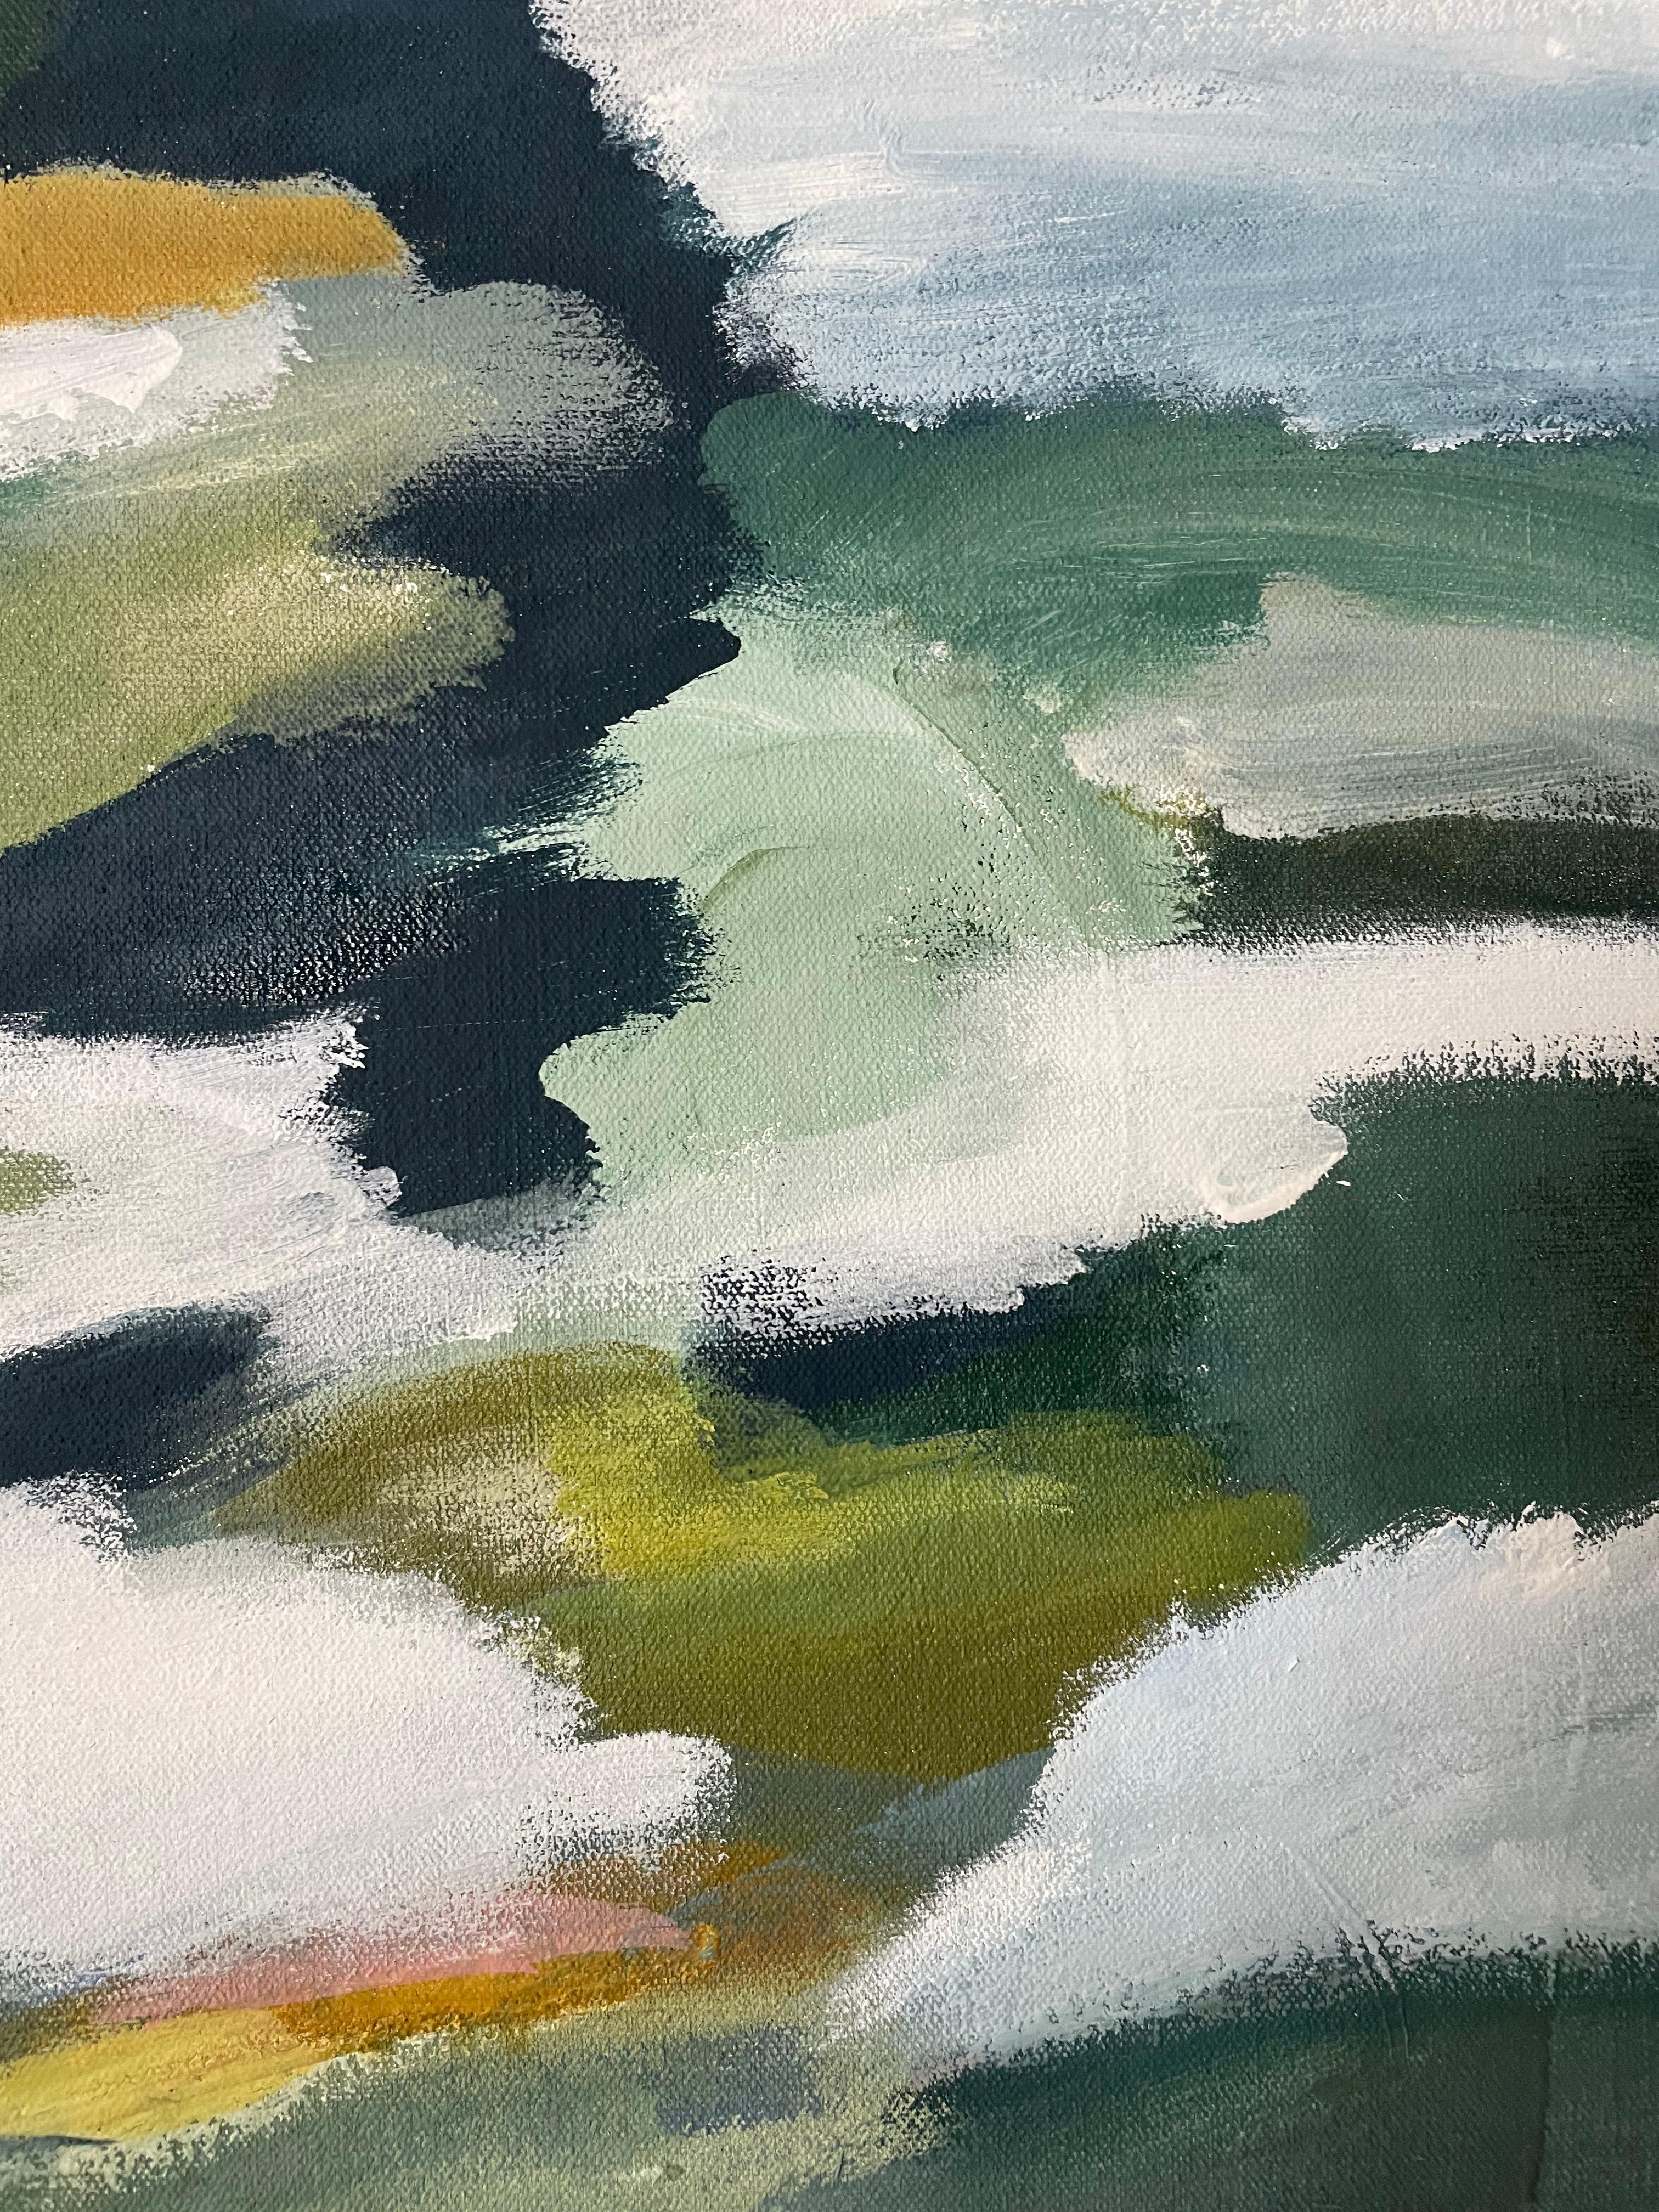 This is an abstract landscape painting by Bianca Wellwood. The colors are vibrant but subtle.

Frame: unframed, further framing possible
Signature: verso
Medium: acrylic/mixed media on canvas
Varnished